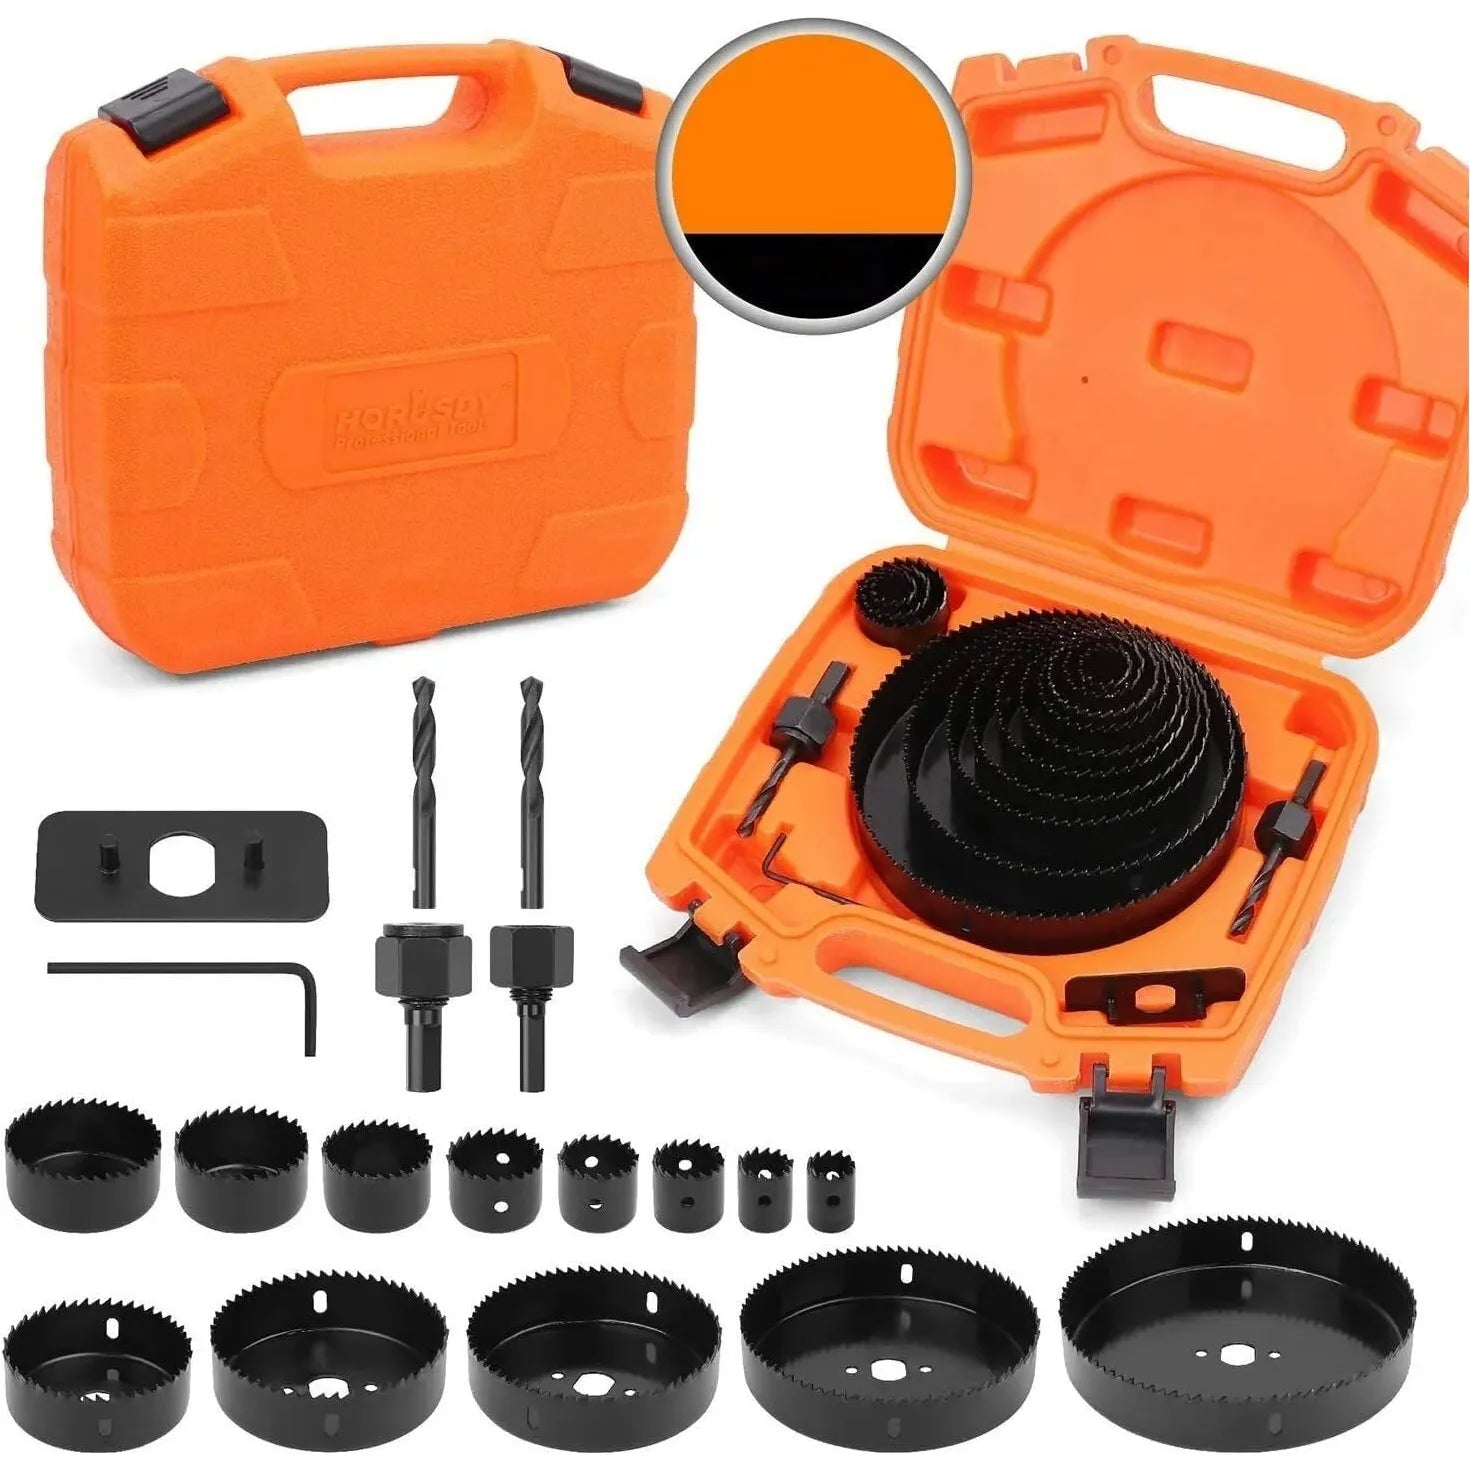 17 Piece Hole Saw Set |19-152mm | Drilling | Cutting For Soft Wood PVC Board - South East Clearance Centre